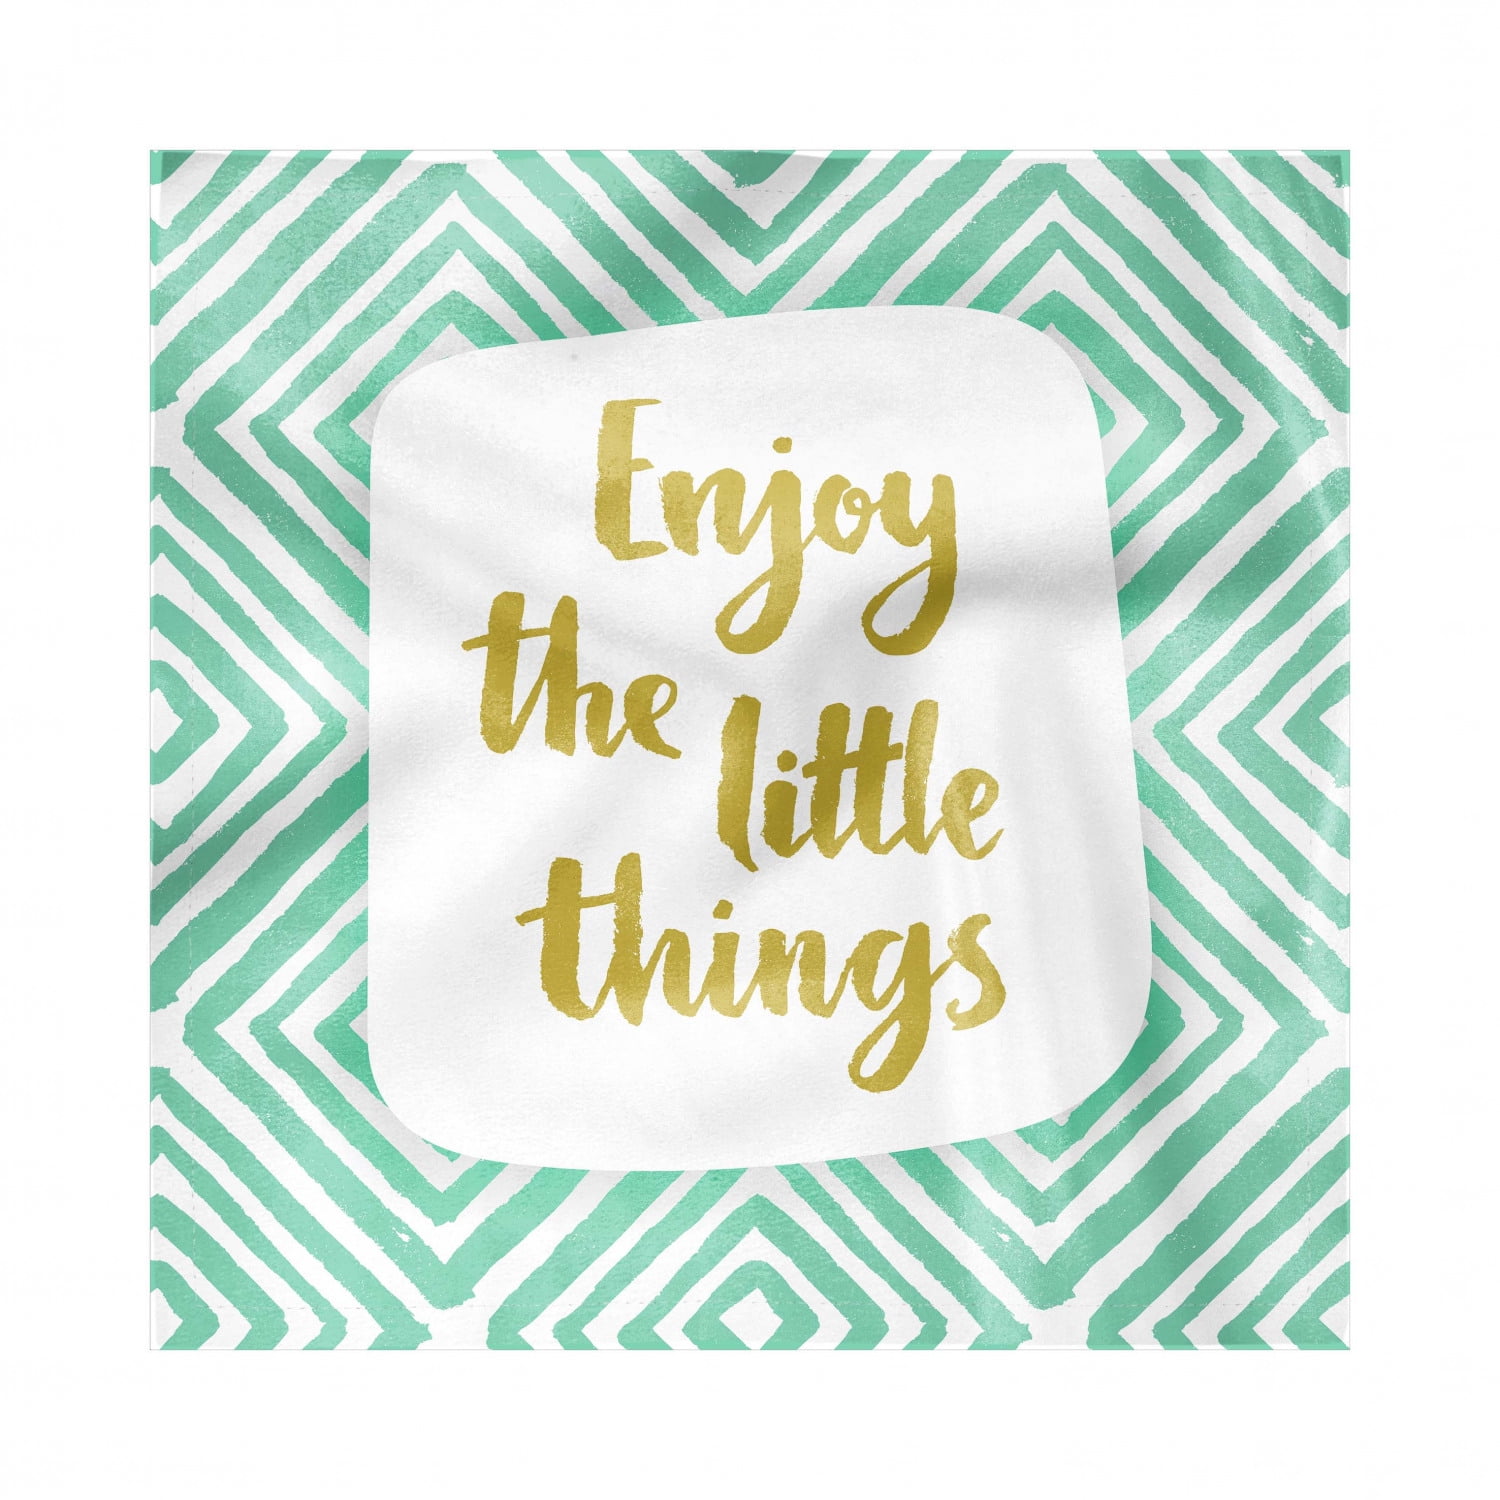 Cloth Placemats Ticking Stripe "Enjoy the little things" Navy & White Set of 4 